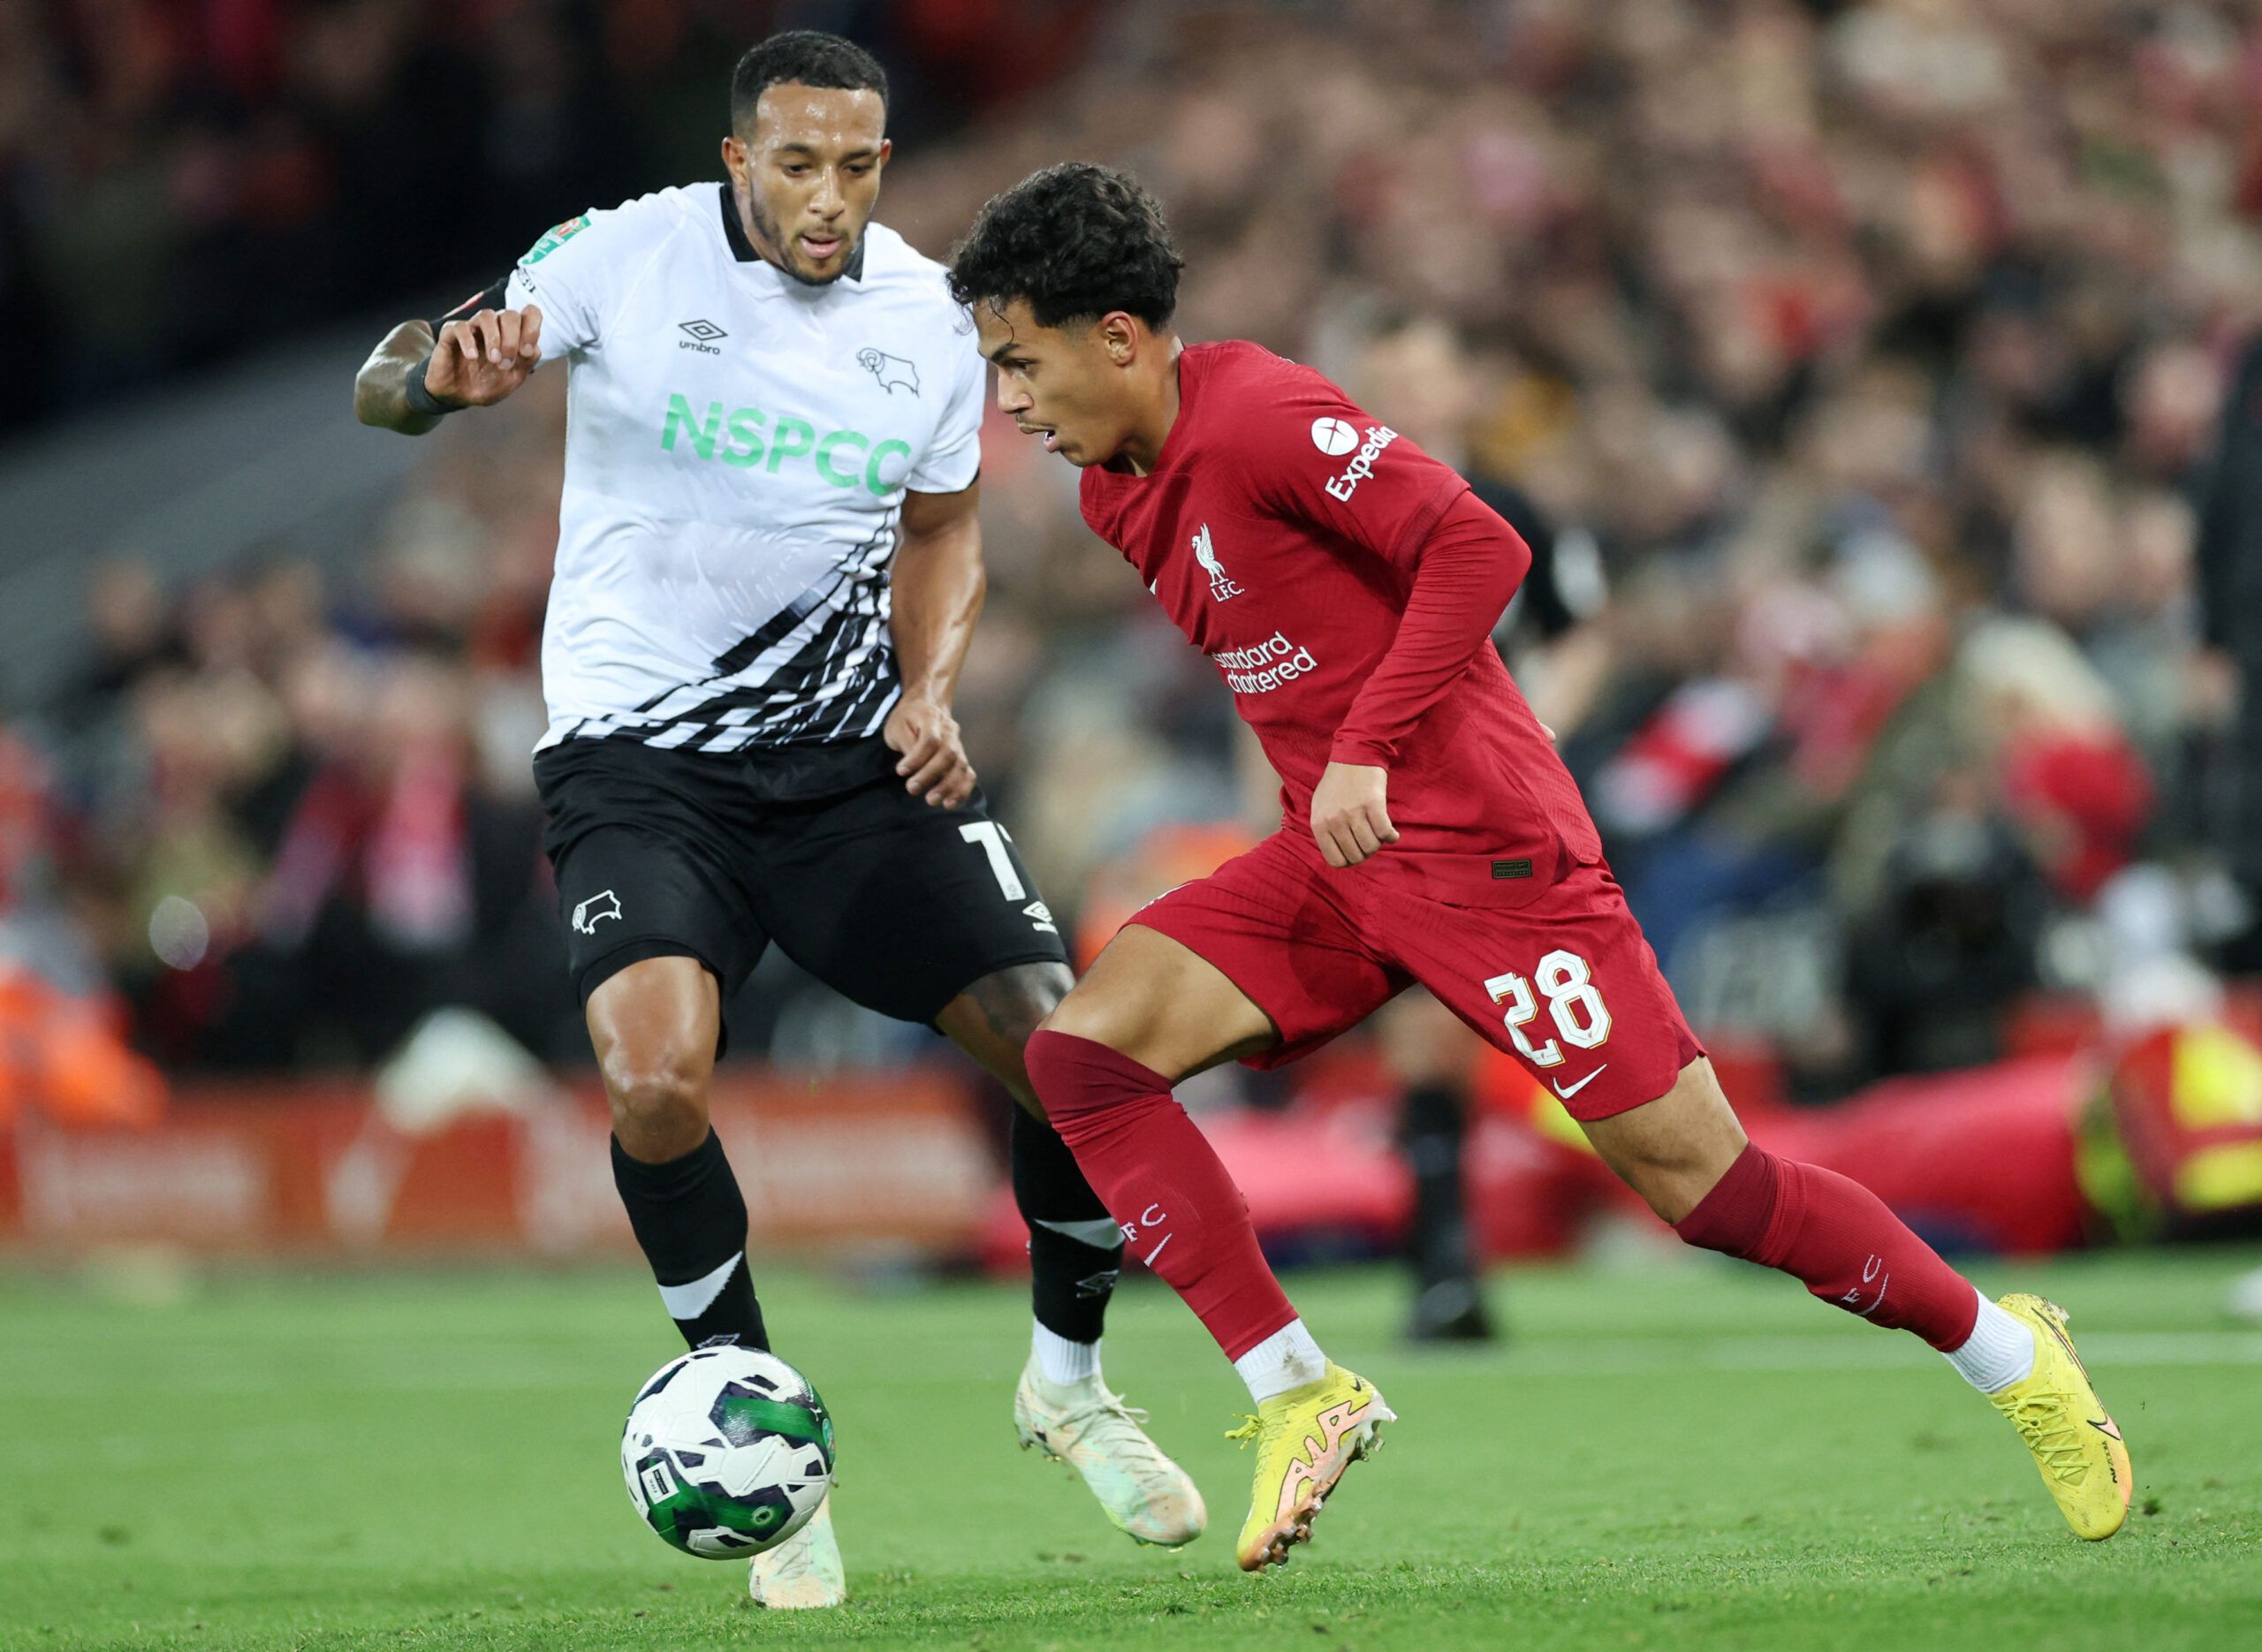 Soccer Football - Carabao Cup Third Round - Liverpool v Derby County - Anfield, Liverpool, Britain - November 9, 2022 Liverpool's Fabio Carvalho in action with Derby County's Nathaniel Mendez-Laing REUTERS/Carl Recine EDITORIAL USE ONLY. No use with unauthorized audio, video, data, fixture lists, club/league logos or 'live' services. Online in-match use limited to 75 images, no video emulation. No use in betting, games or single club /league/player publications.  Please contact your account repr